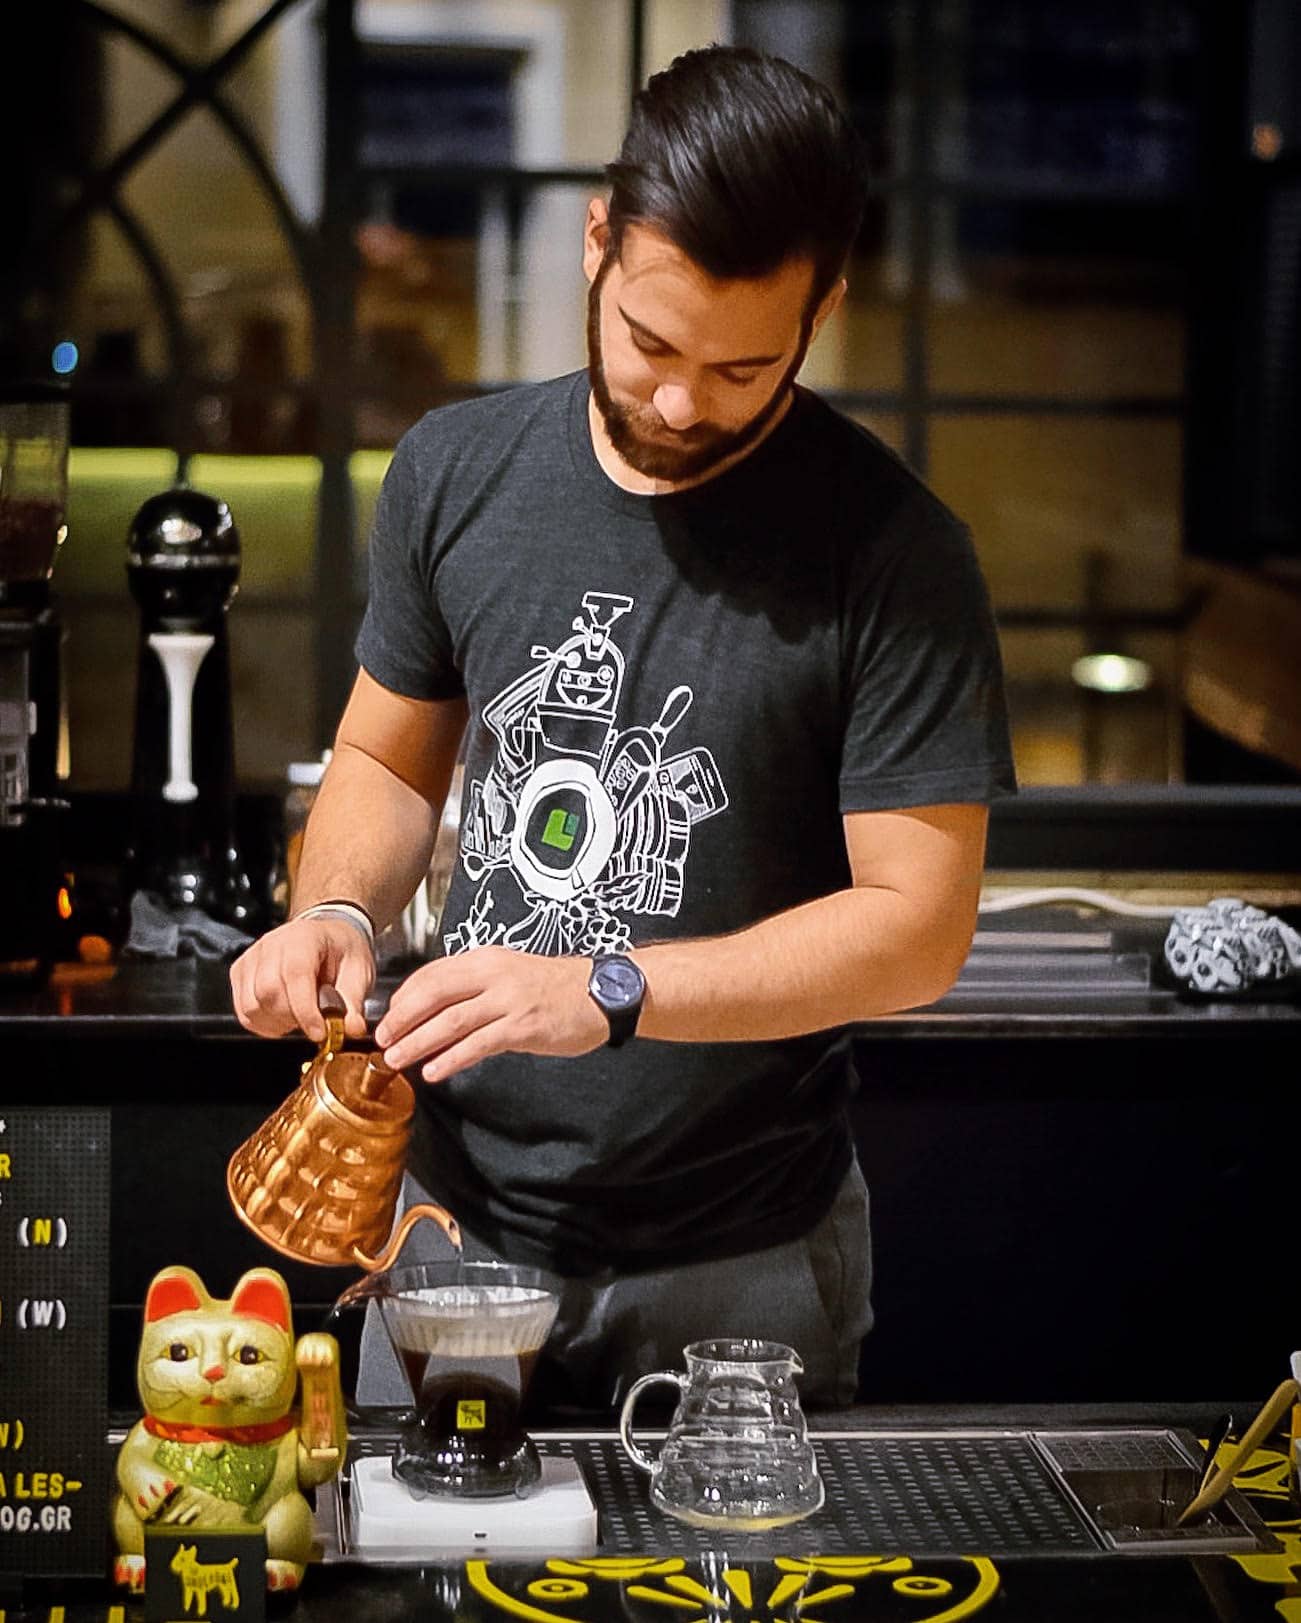 Award winning barista and trainer at The Underdog Michalis Dimitrakopoulos